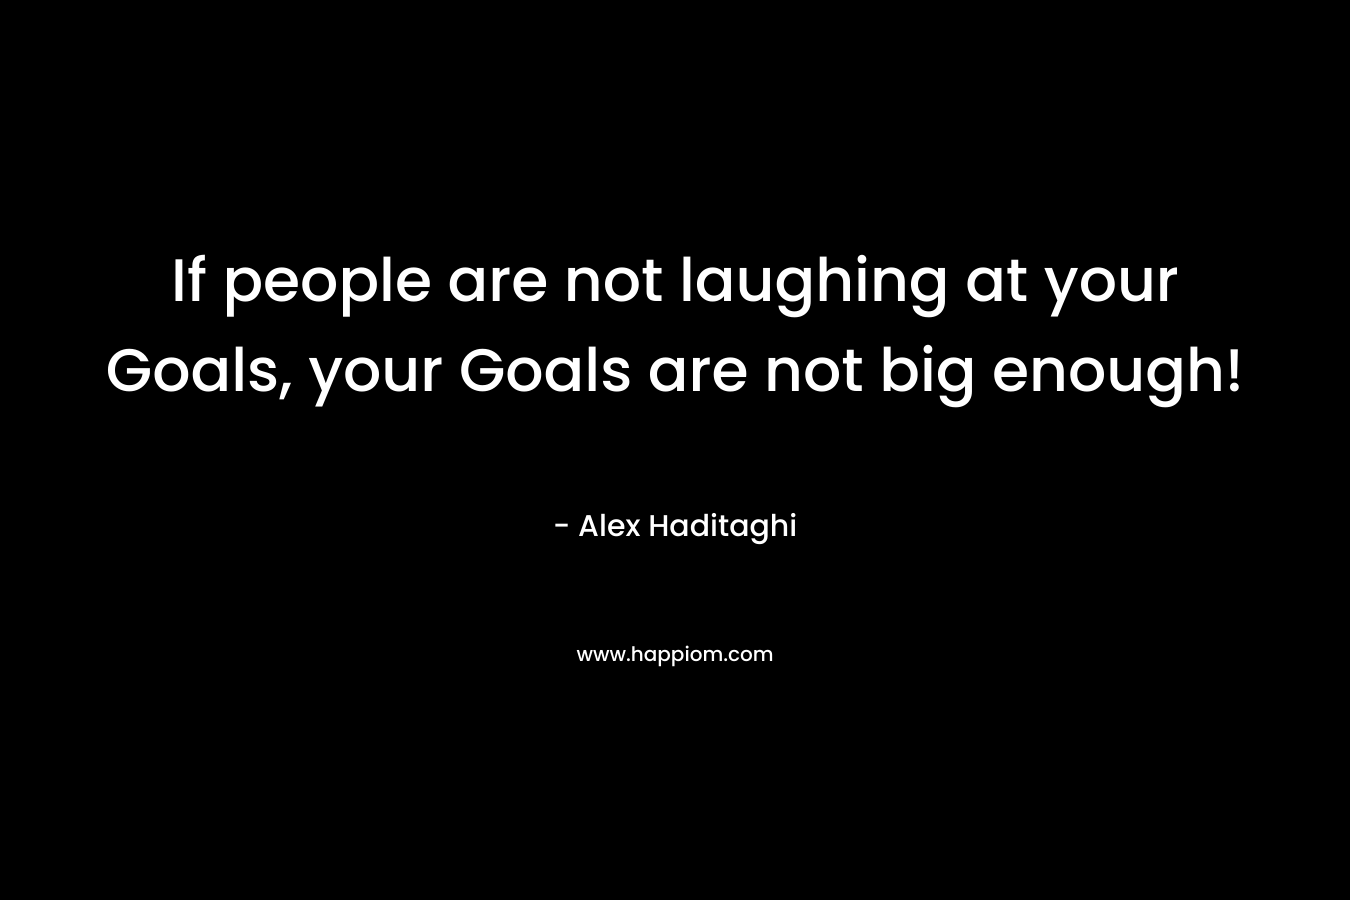 If people are not laughing at your Goals, your Goals are not big enough!